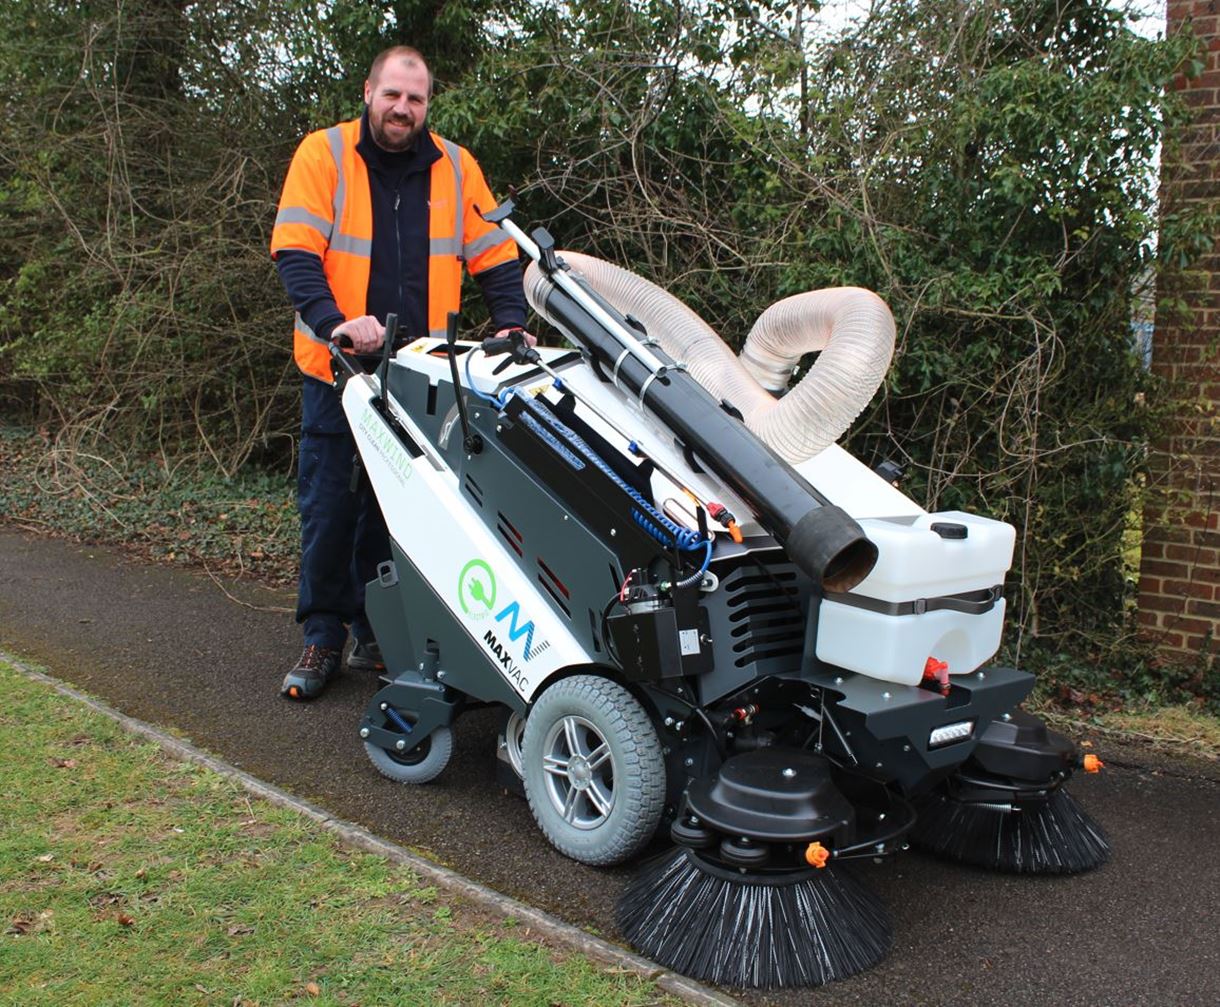 New electric pavement sweepers